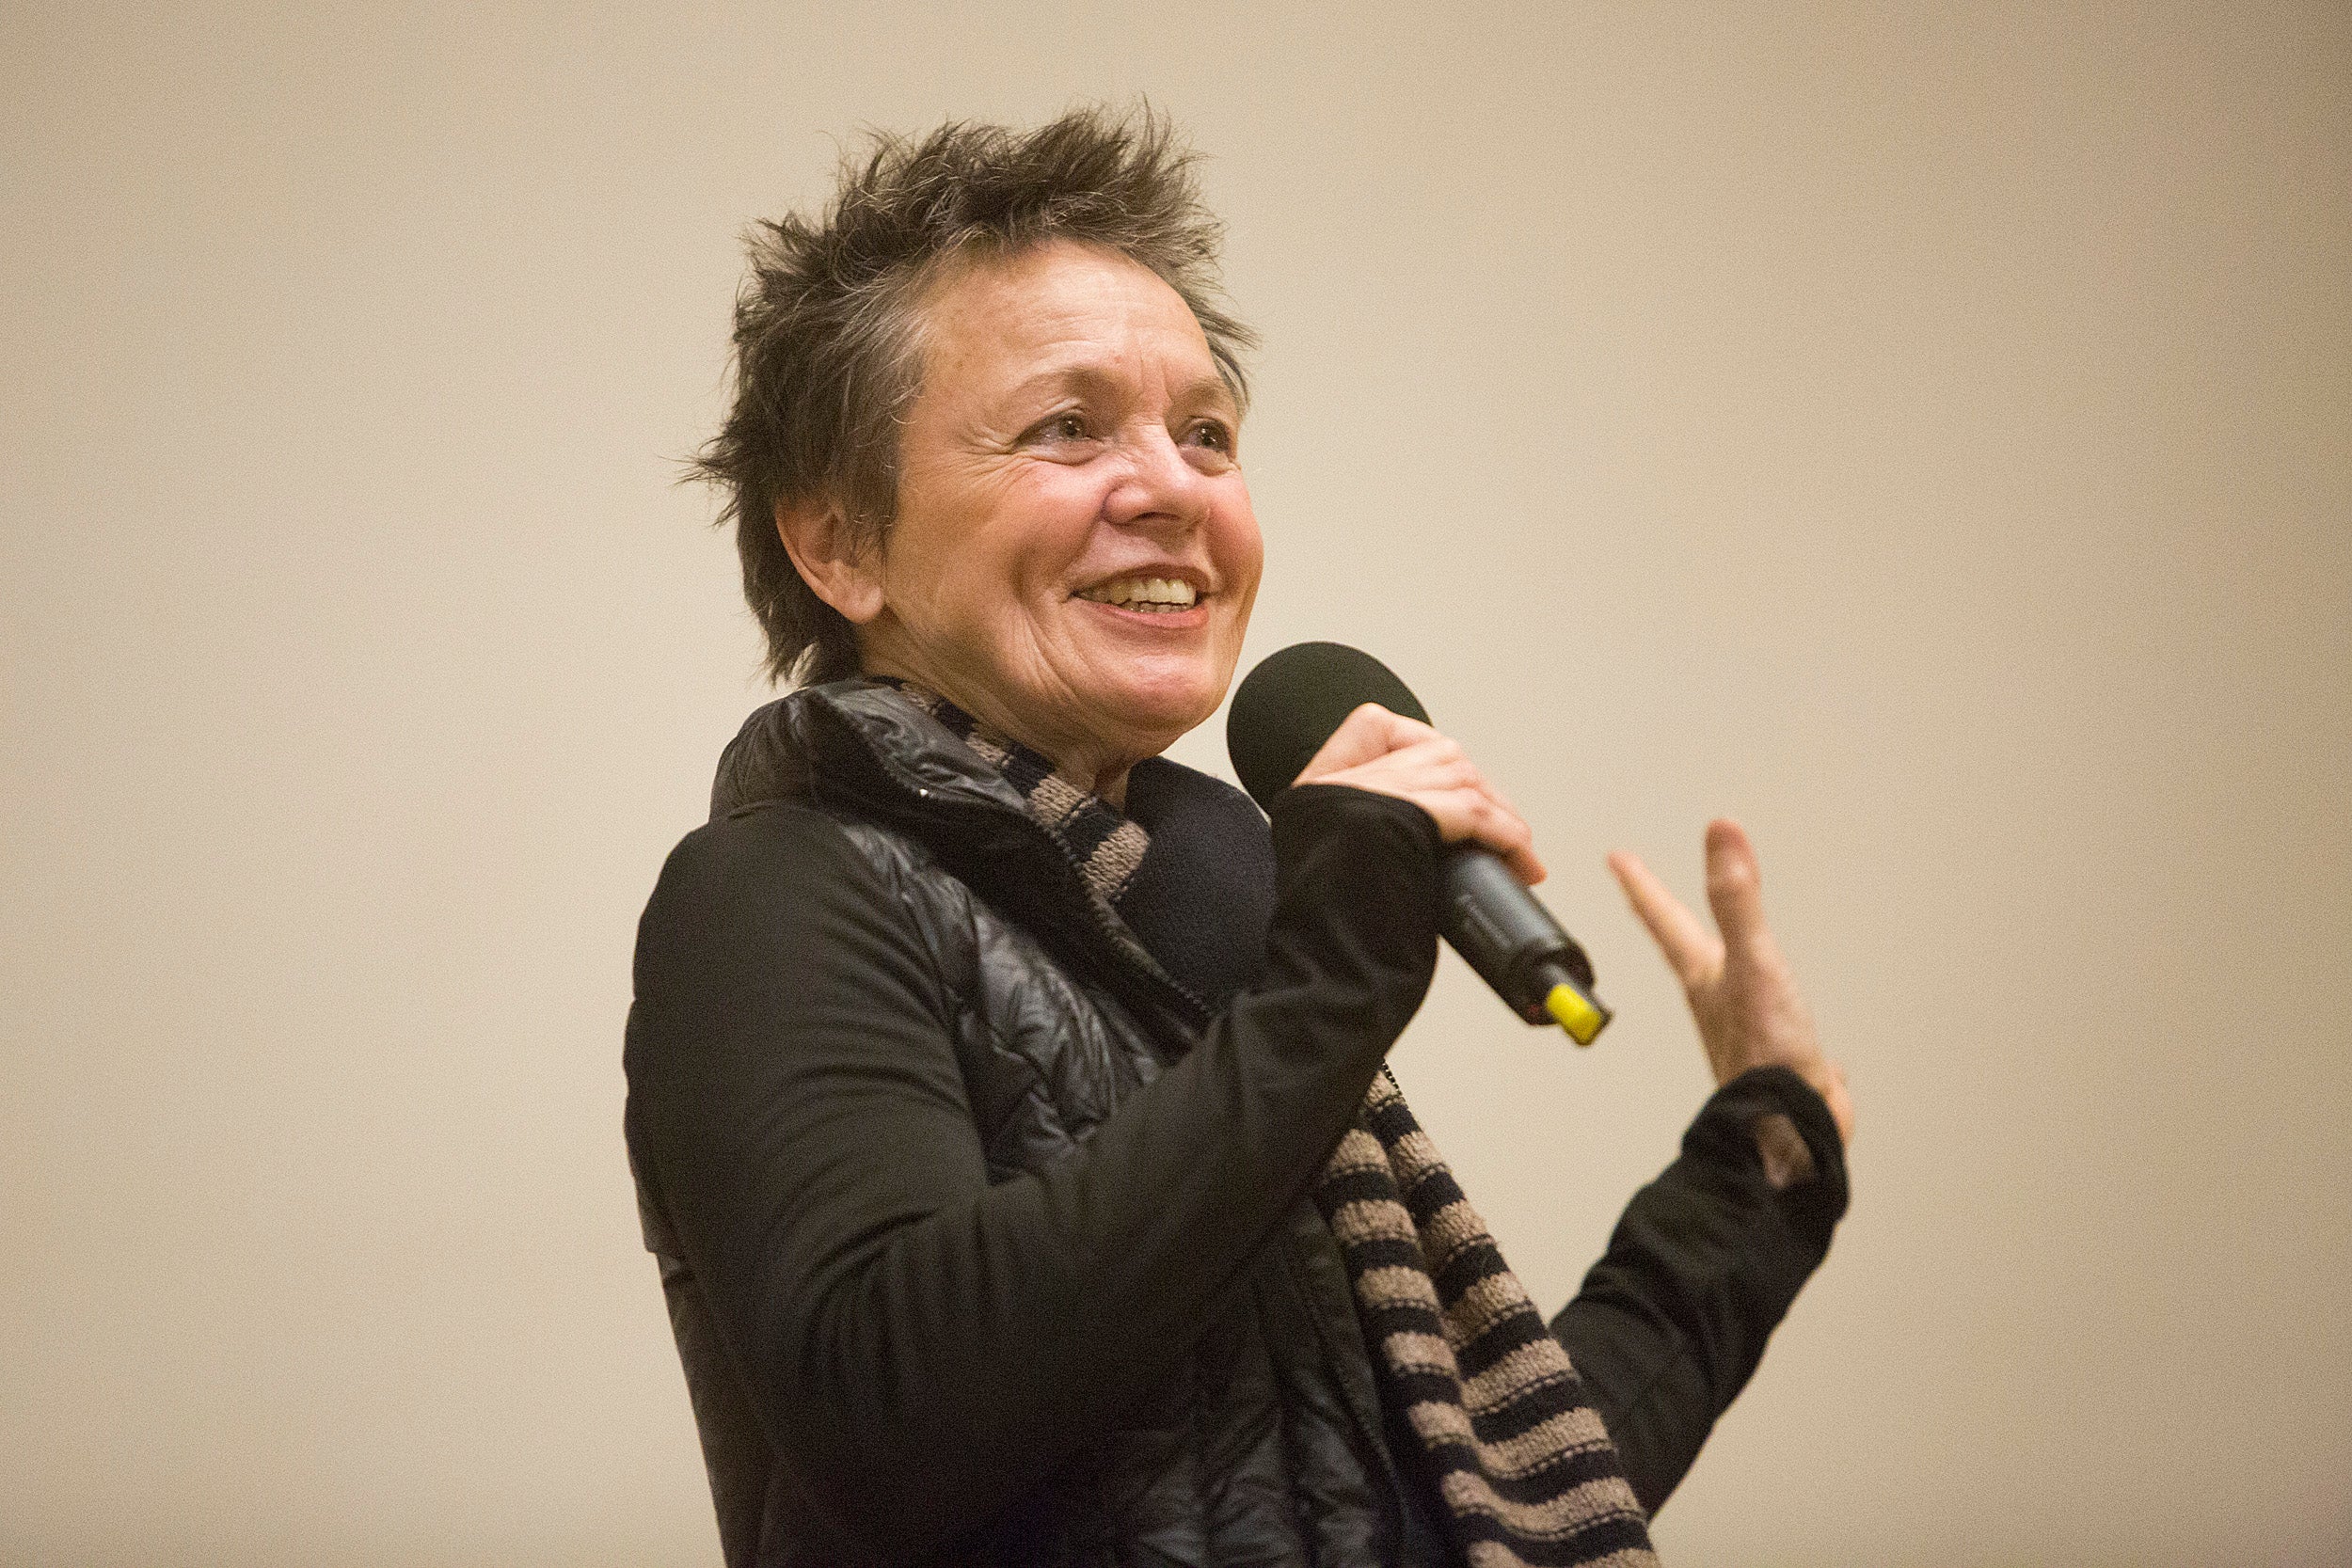 Laurie Anderson.